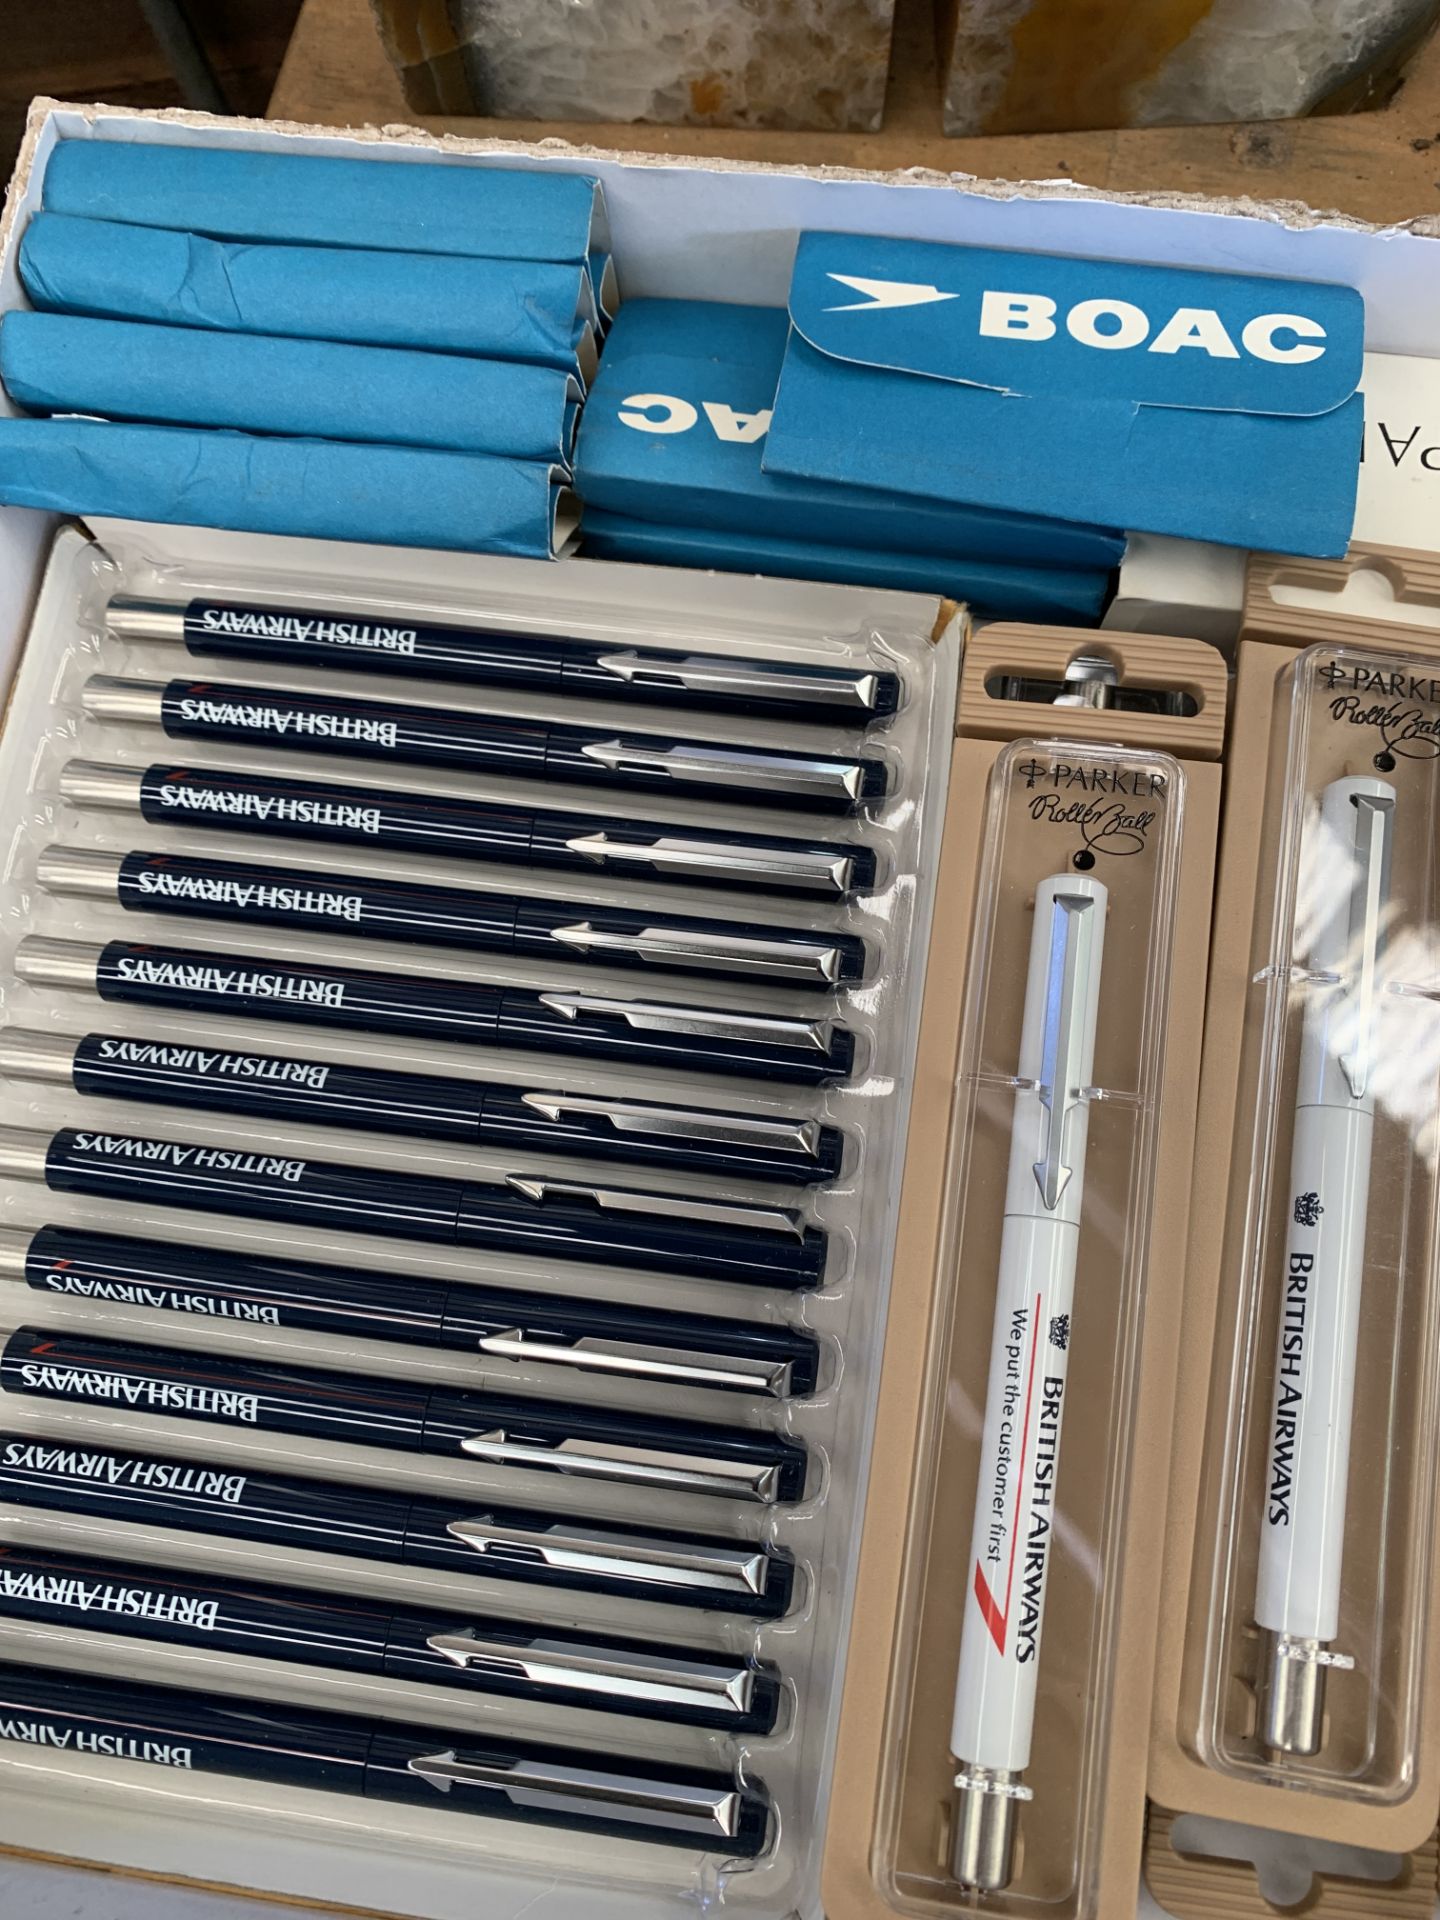 Collection of British Airways pens and BOAC golf tees